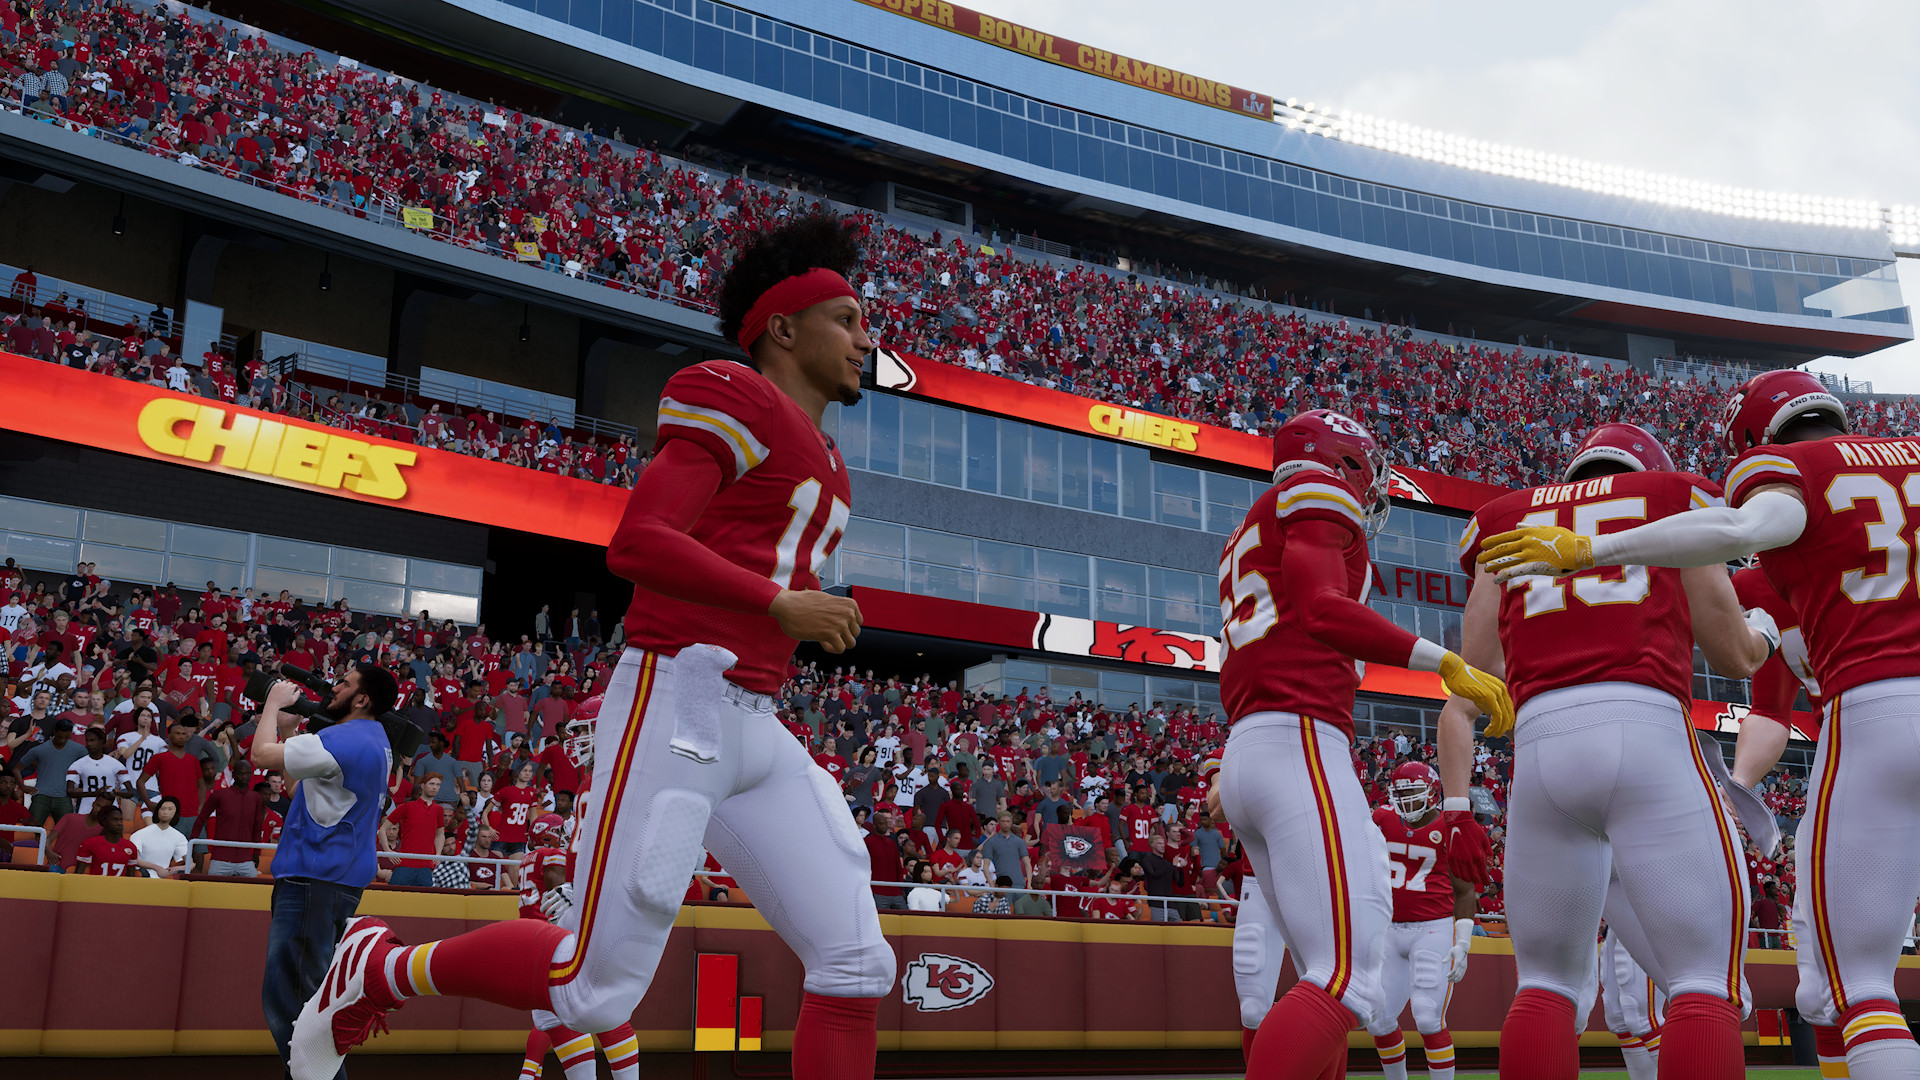 Best Madden 22 teams: Patrick Mahomes runs out onto the pitch with his teammates.